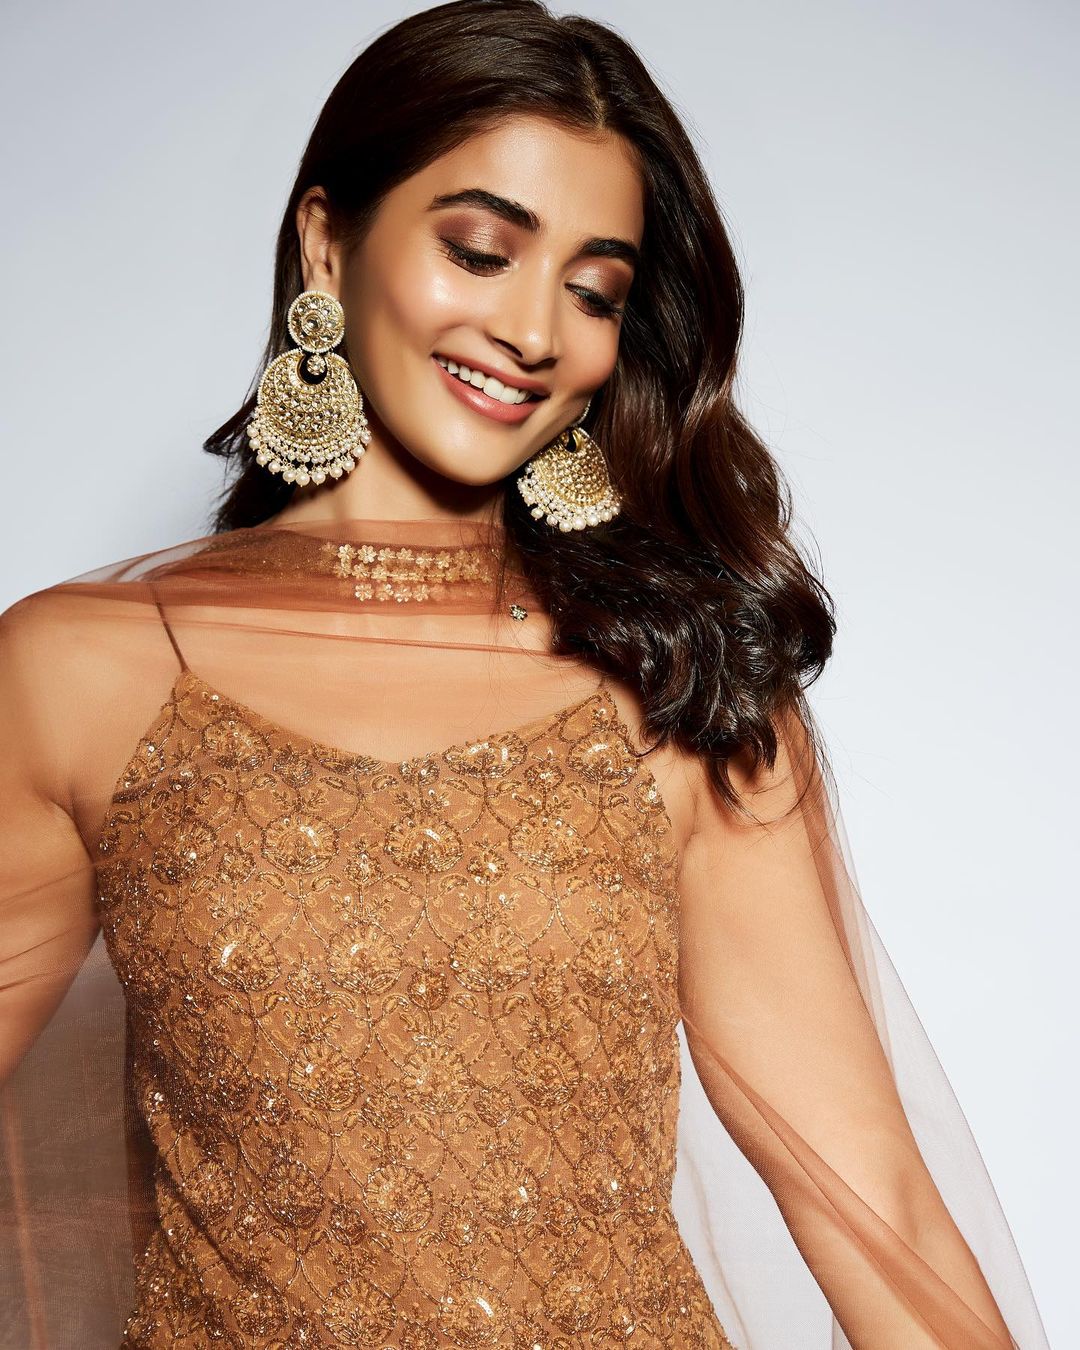 Pooja Hegde wears a pair of chandbaali earrings with the outfit.